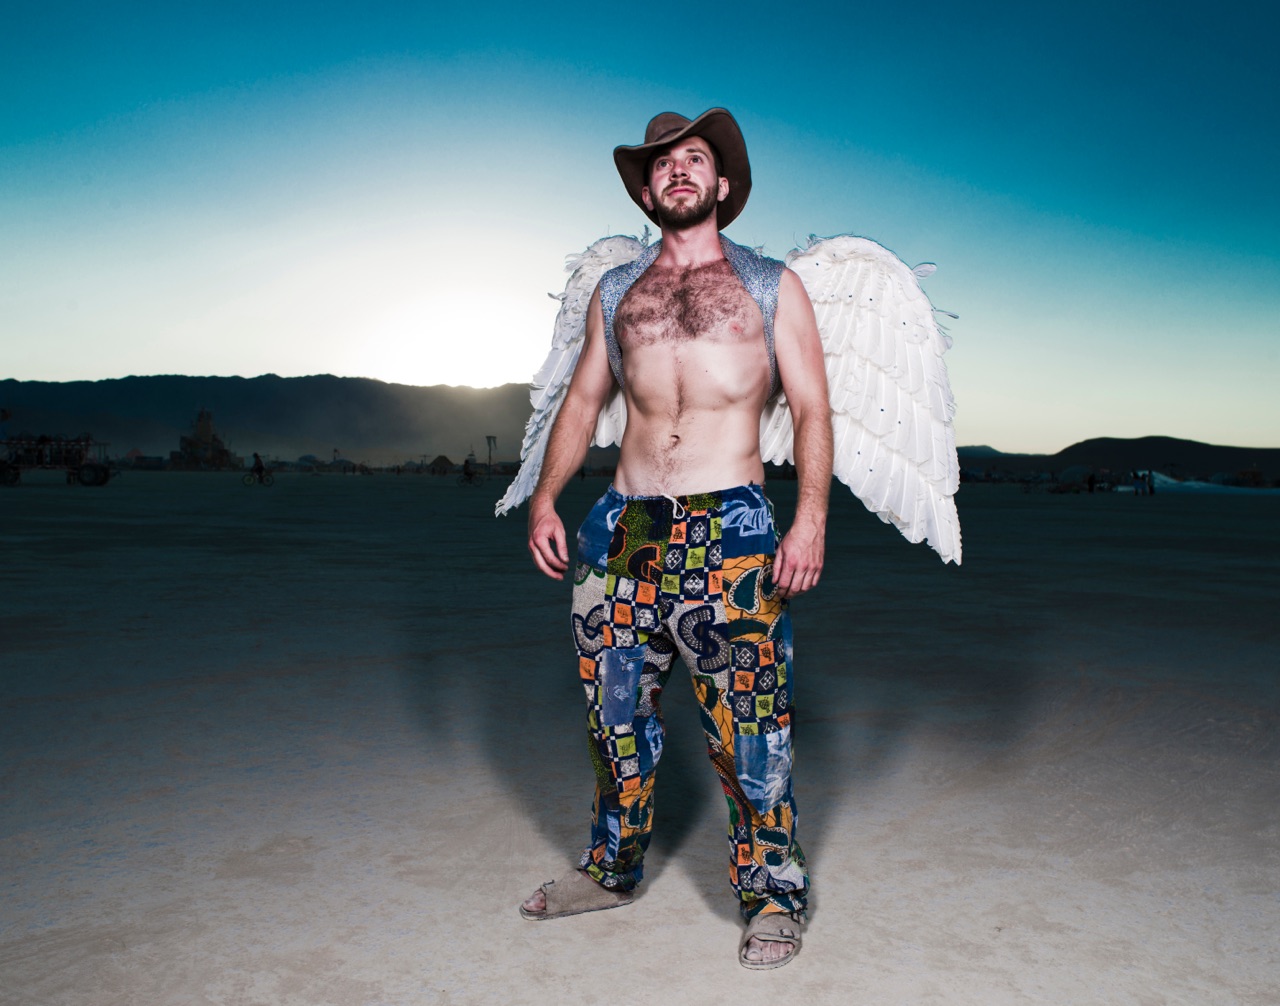 Erupting Passion: Nude Men at Burning Man Come Alive in These Intimate Shots